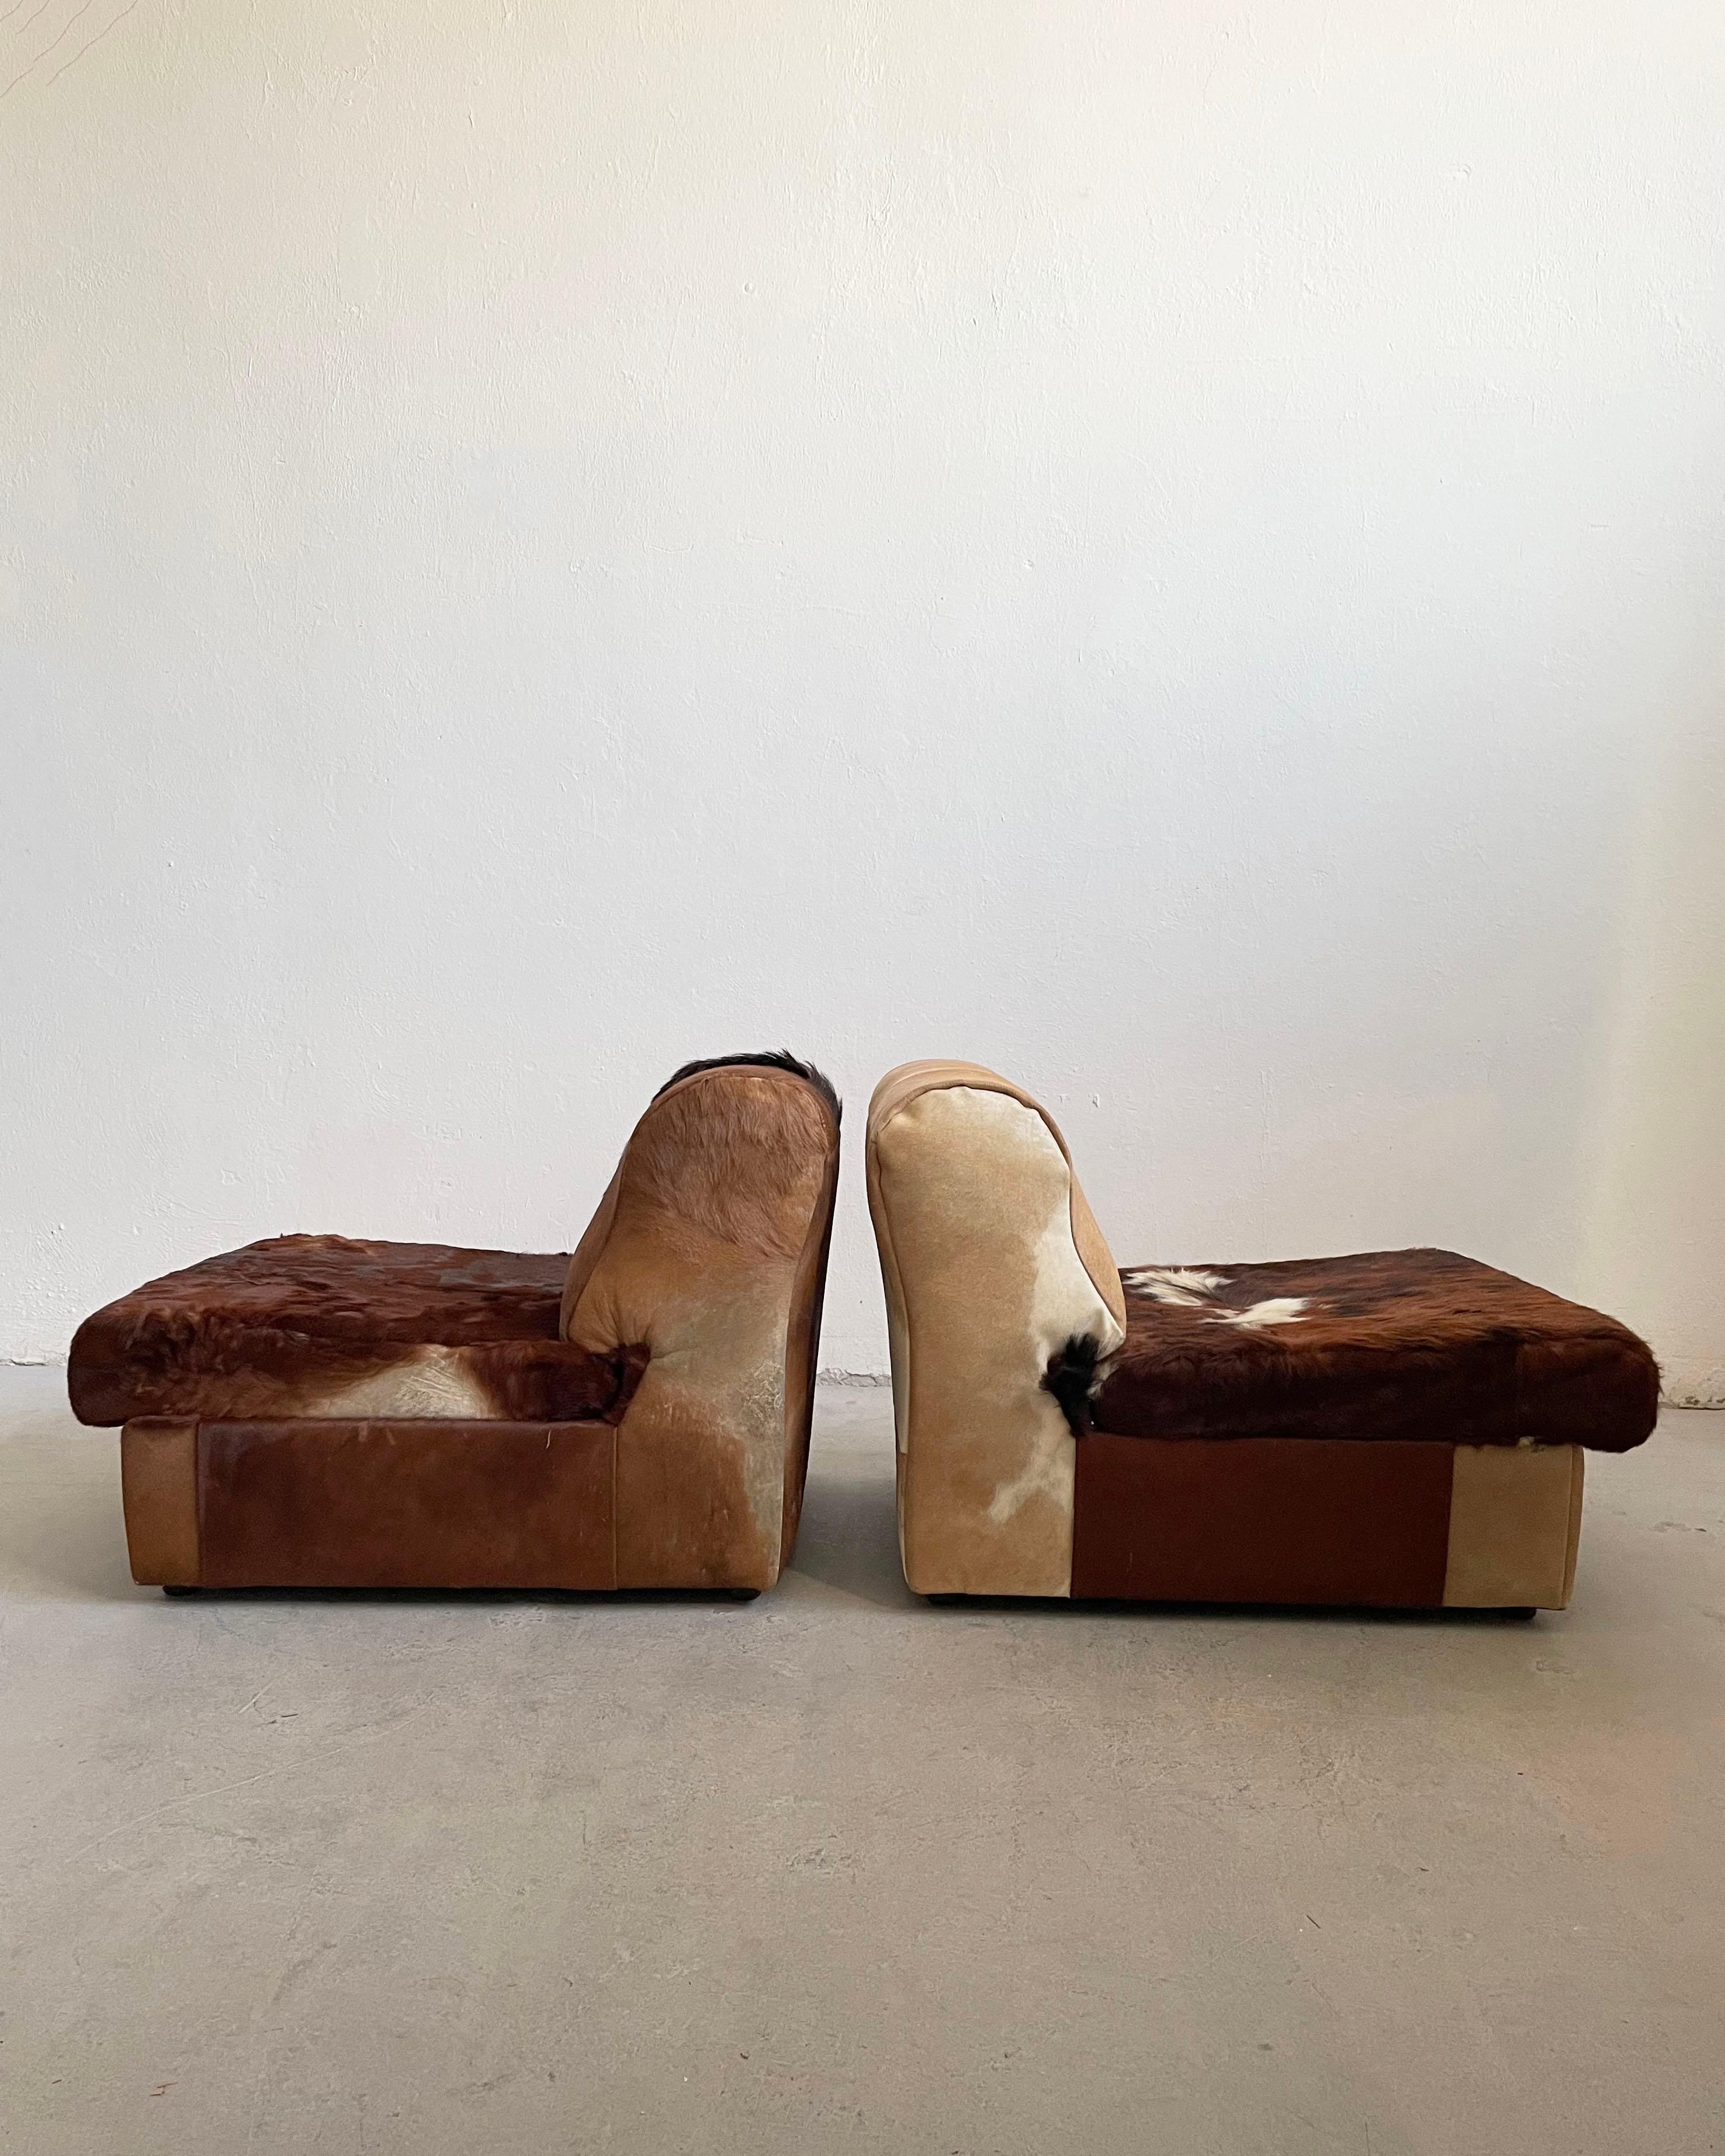 European Lounge Seating Set, Sofa + Chairs in Cow Hide, Cow Fur, 1970's For Sale